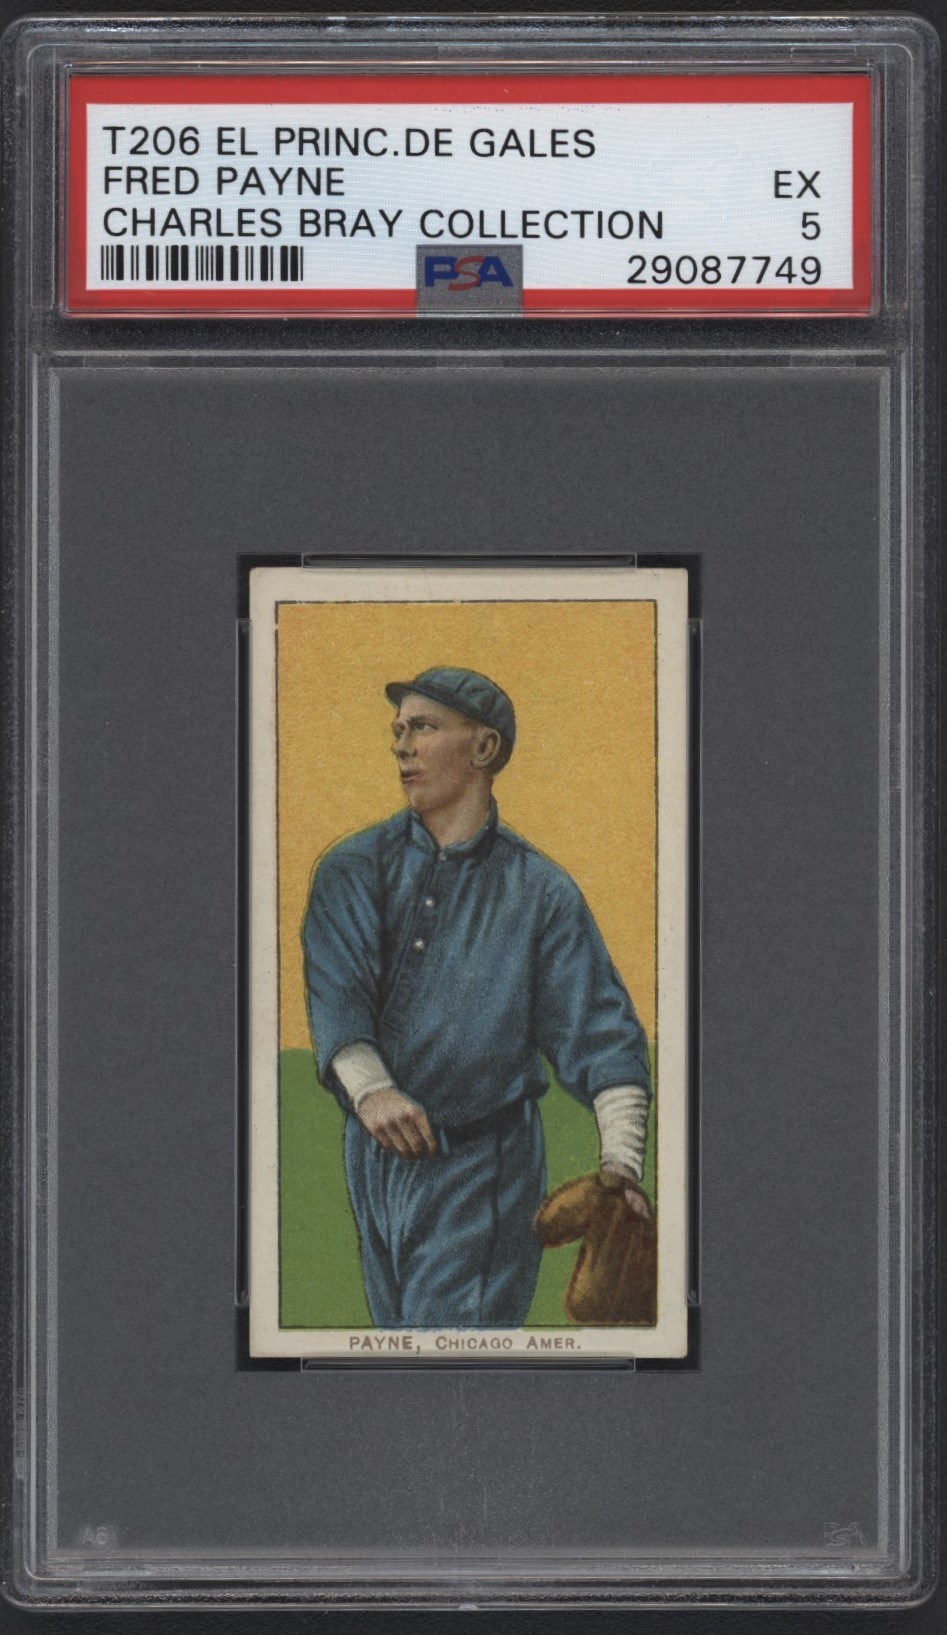 T206 El Principe De Gales Fred Payne PSA EX 5 From the Charles Bray Collection